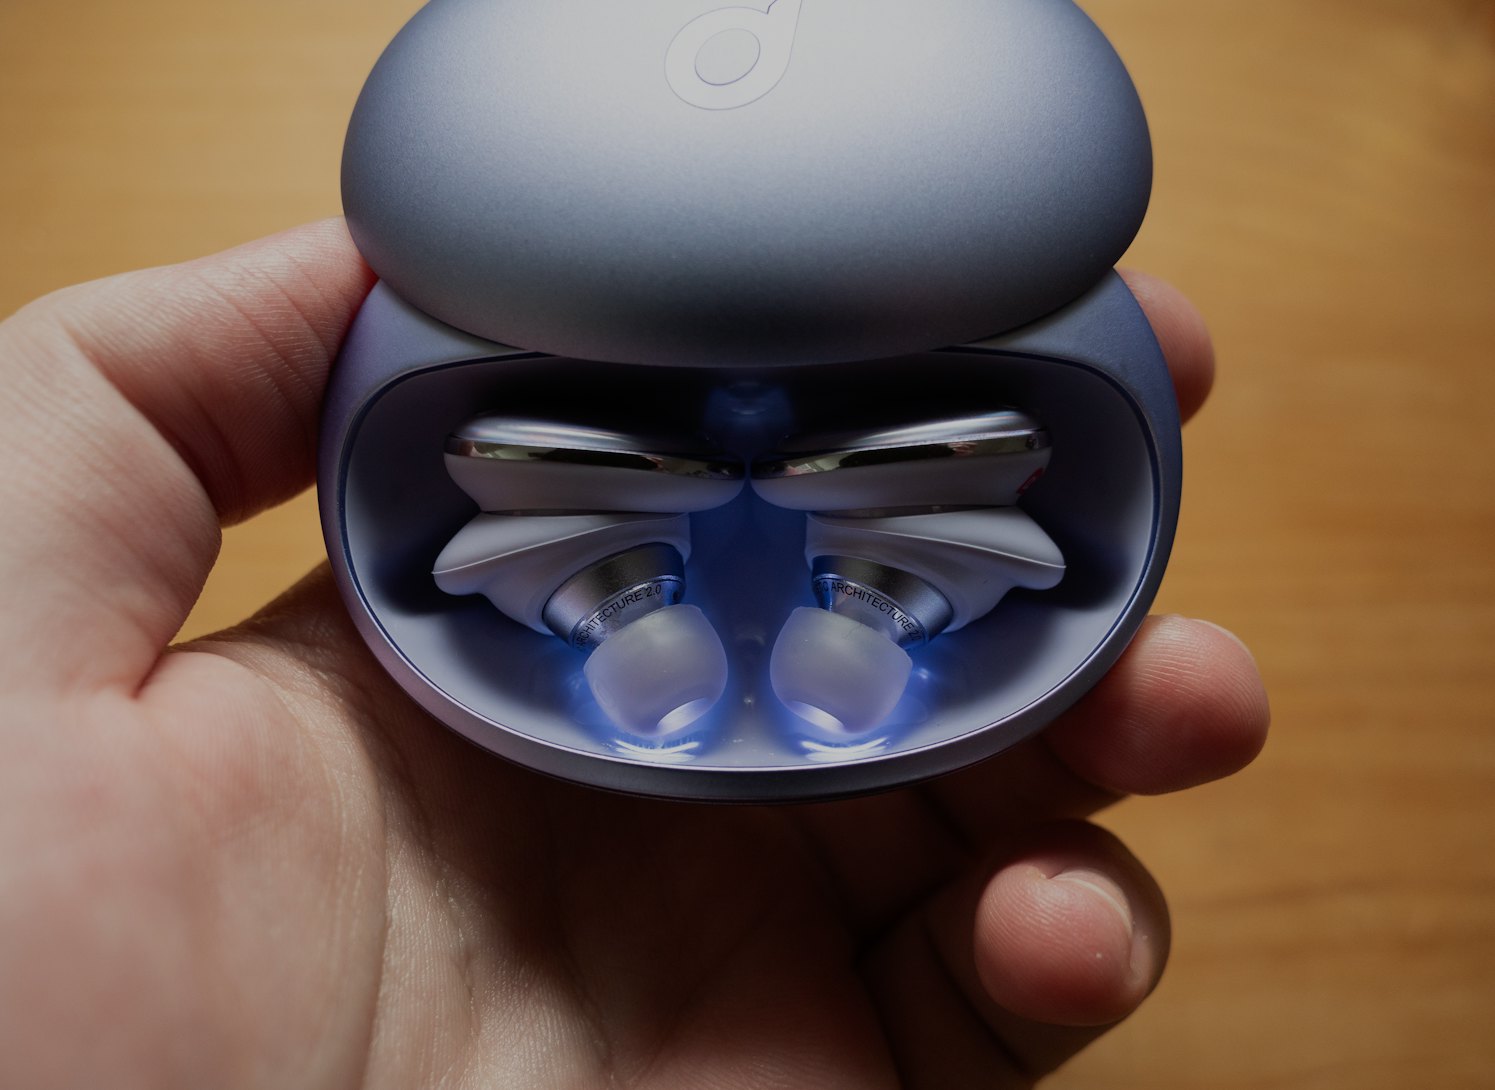 Soundcore Liberty 3 Pro earbuds review - not quite AirPods Pro but